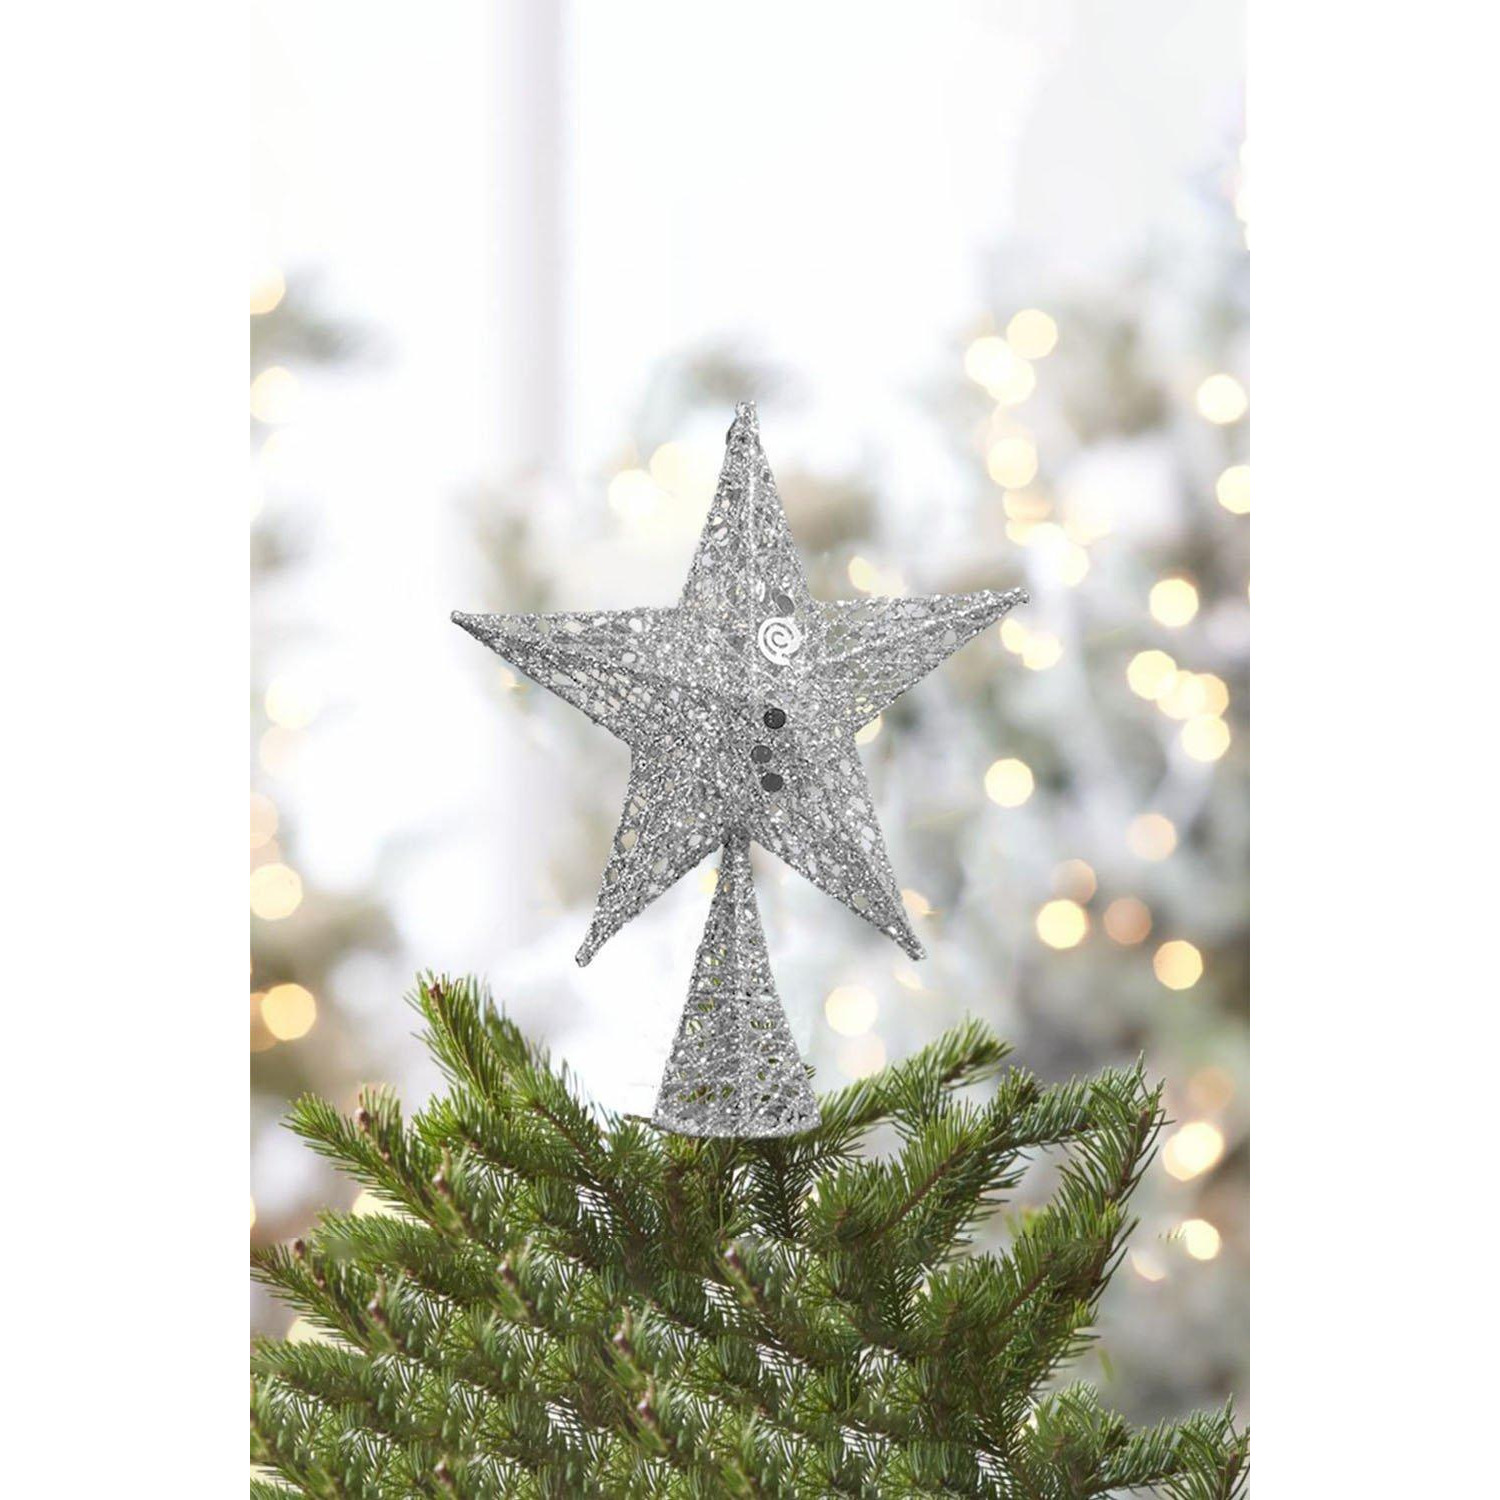 Wrought Iron Christmas Tree Topper Star Ornament Home Decor - image 1